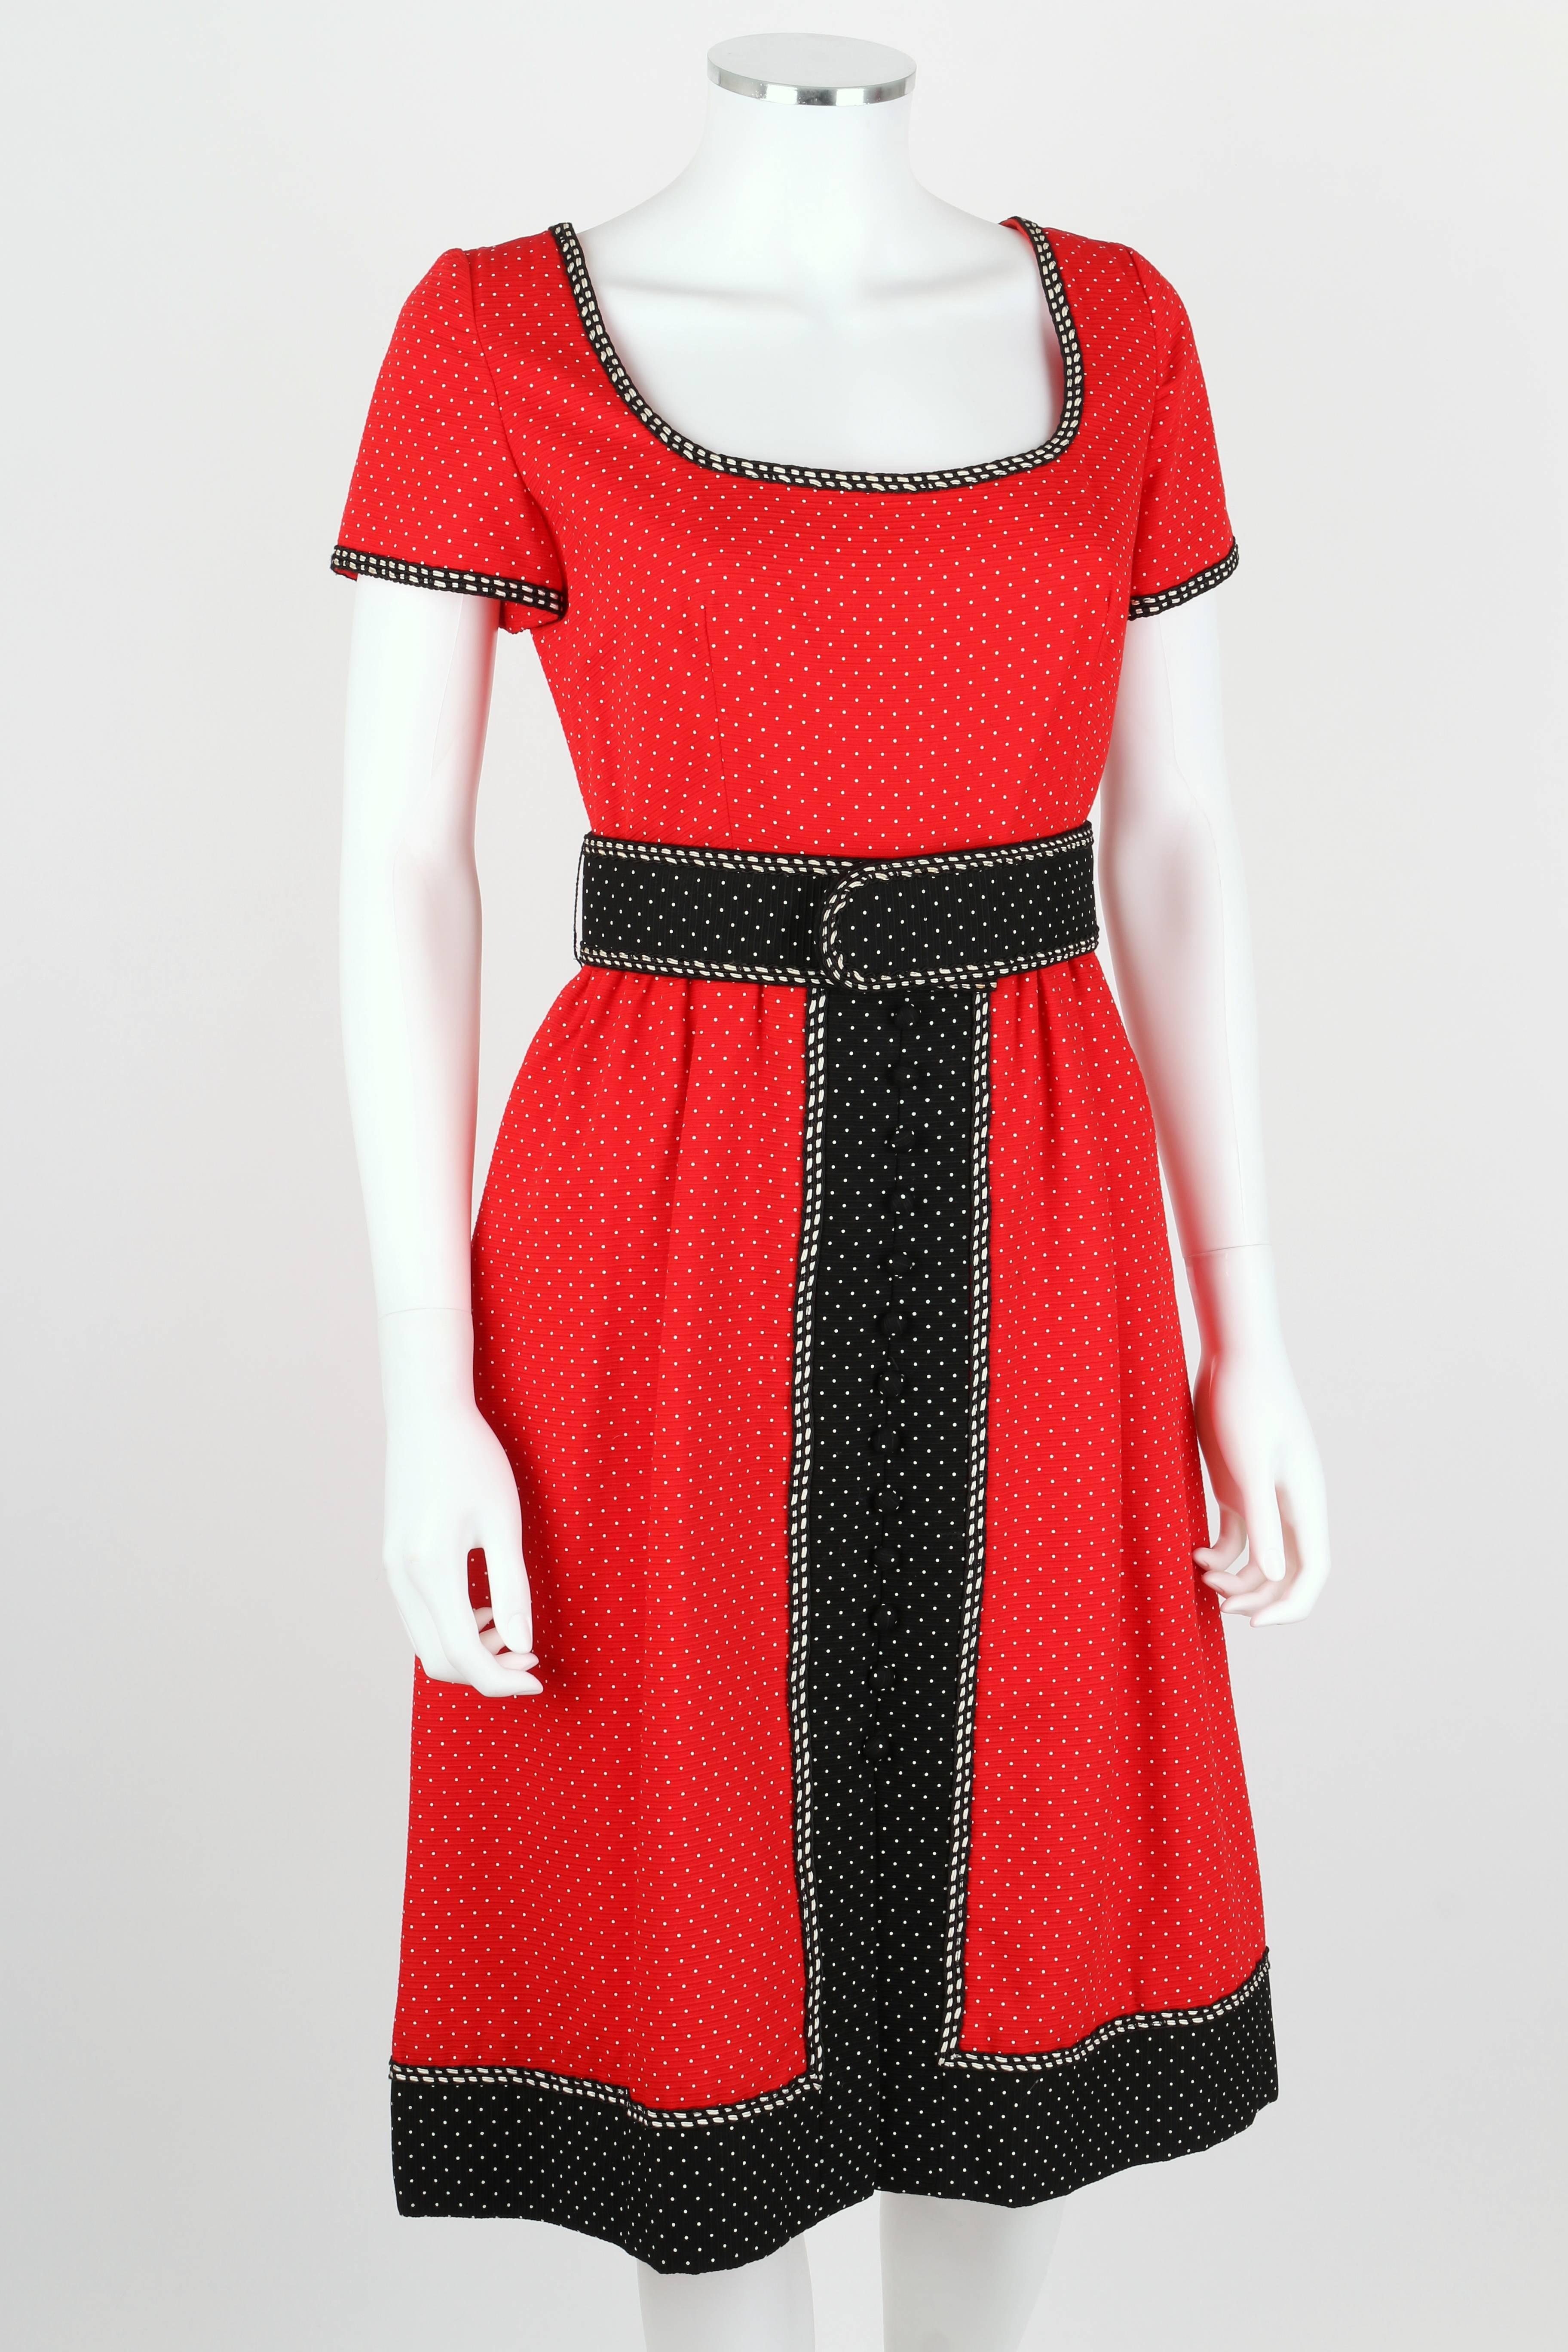 Rare 1960's early Oscar de la Renta boutique red, black, and white polka dotted dress. Black and white corded trim. Short sleeves. Low scoop neckline. Button detail at front of skirt. Dress zips at center back. Lined. Matching belt. Please note that